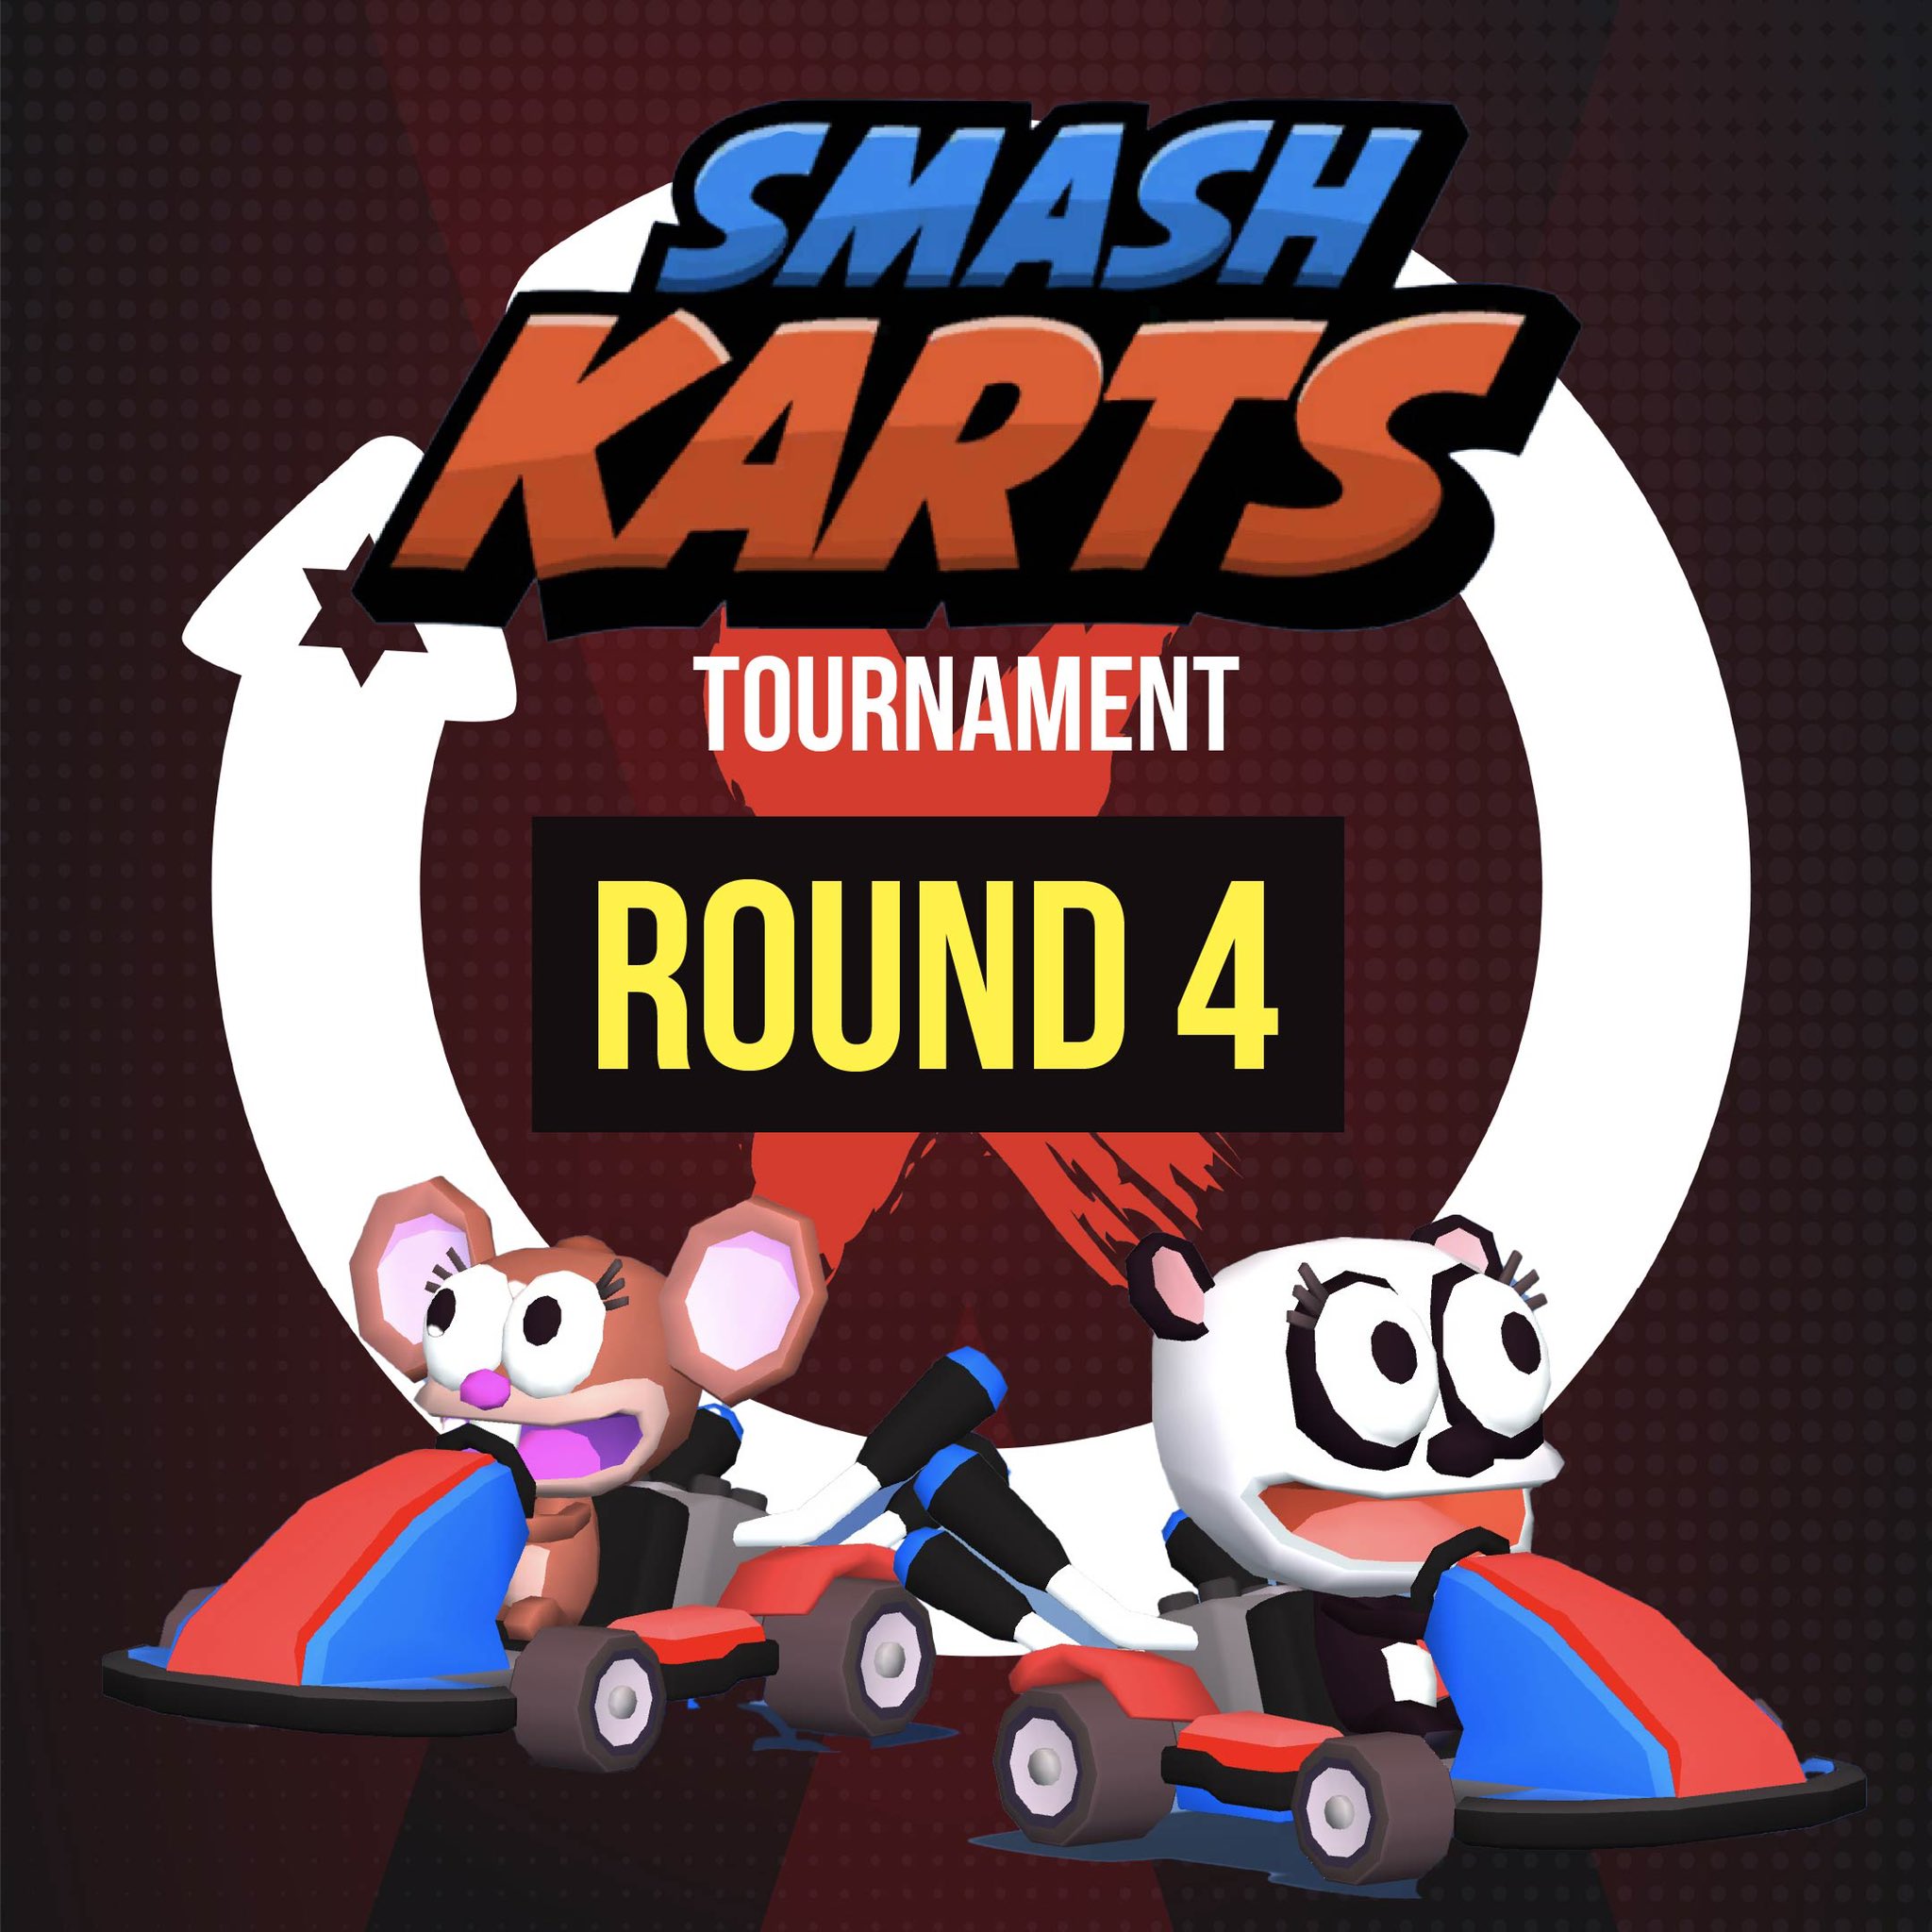 X-Fuera on X: Smash Karts Round 4 is starting in 10 minutes!! Absolutely  unreal way to start the day & get involved with the Motoverse community!    / X